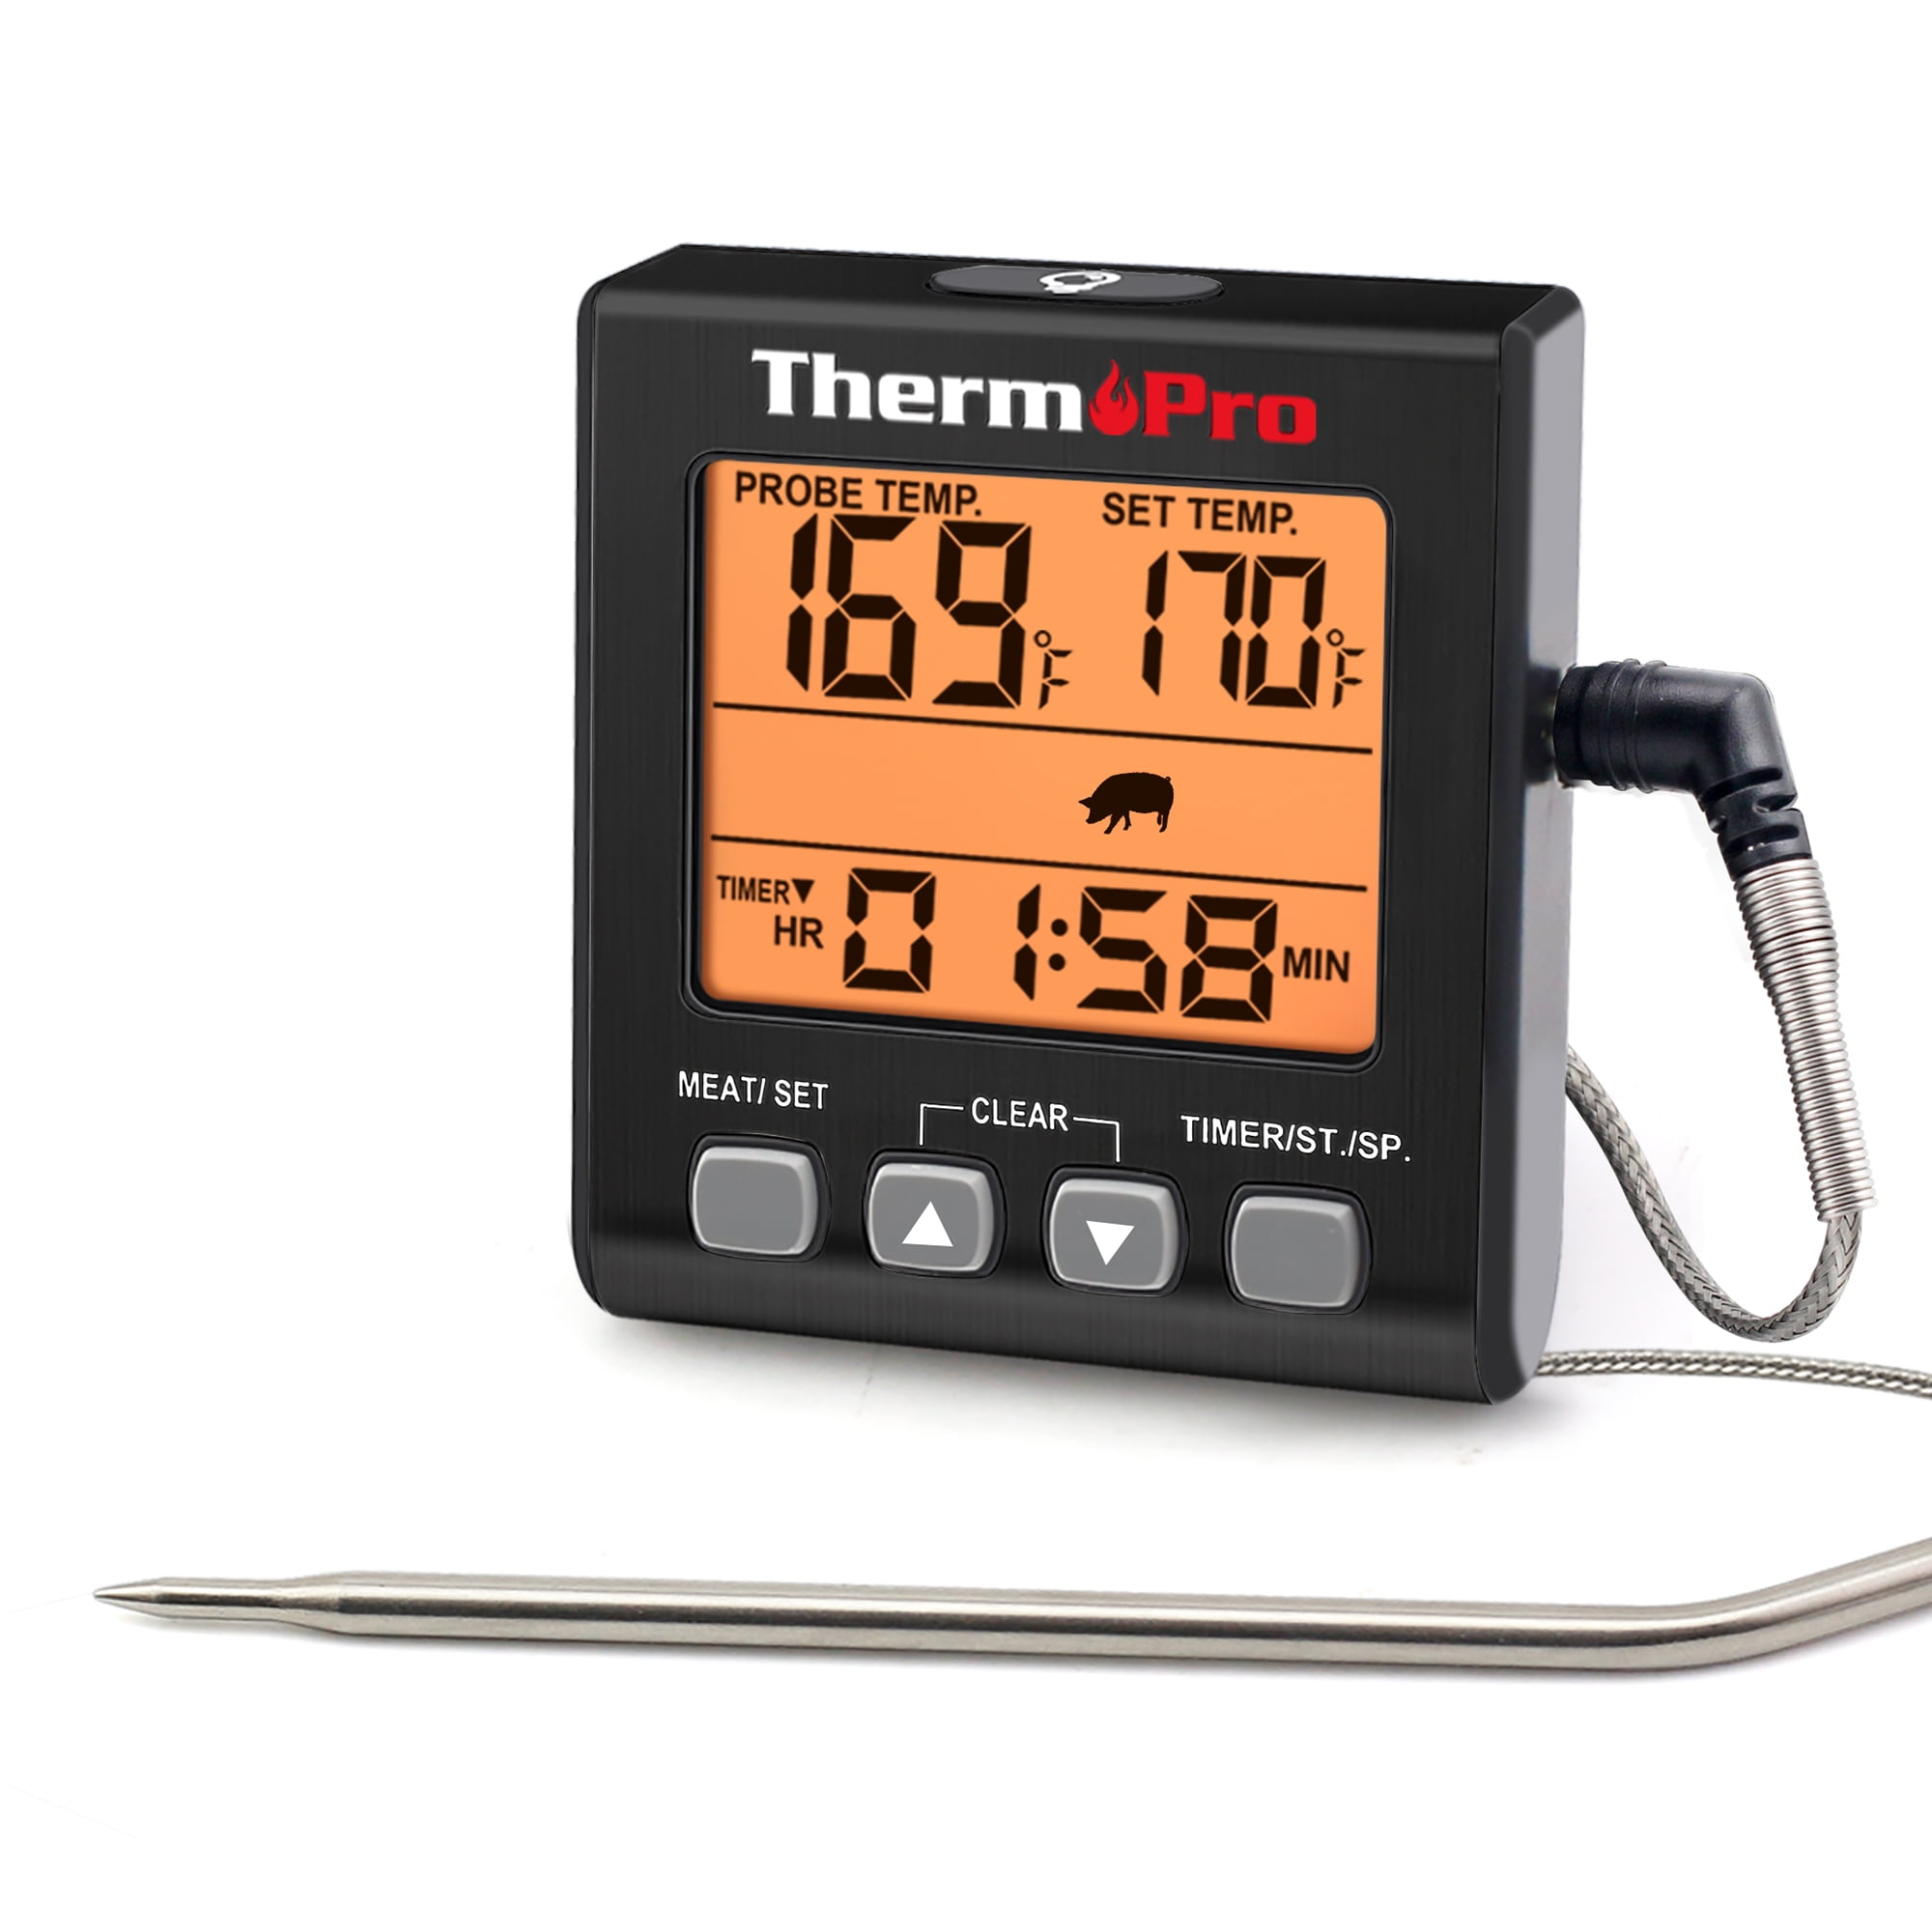 ThermoPro TP06B Digital Probe Kitchen Meat Food Candy Smoker Oven BBQ  Cooking Thermometer with Timer